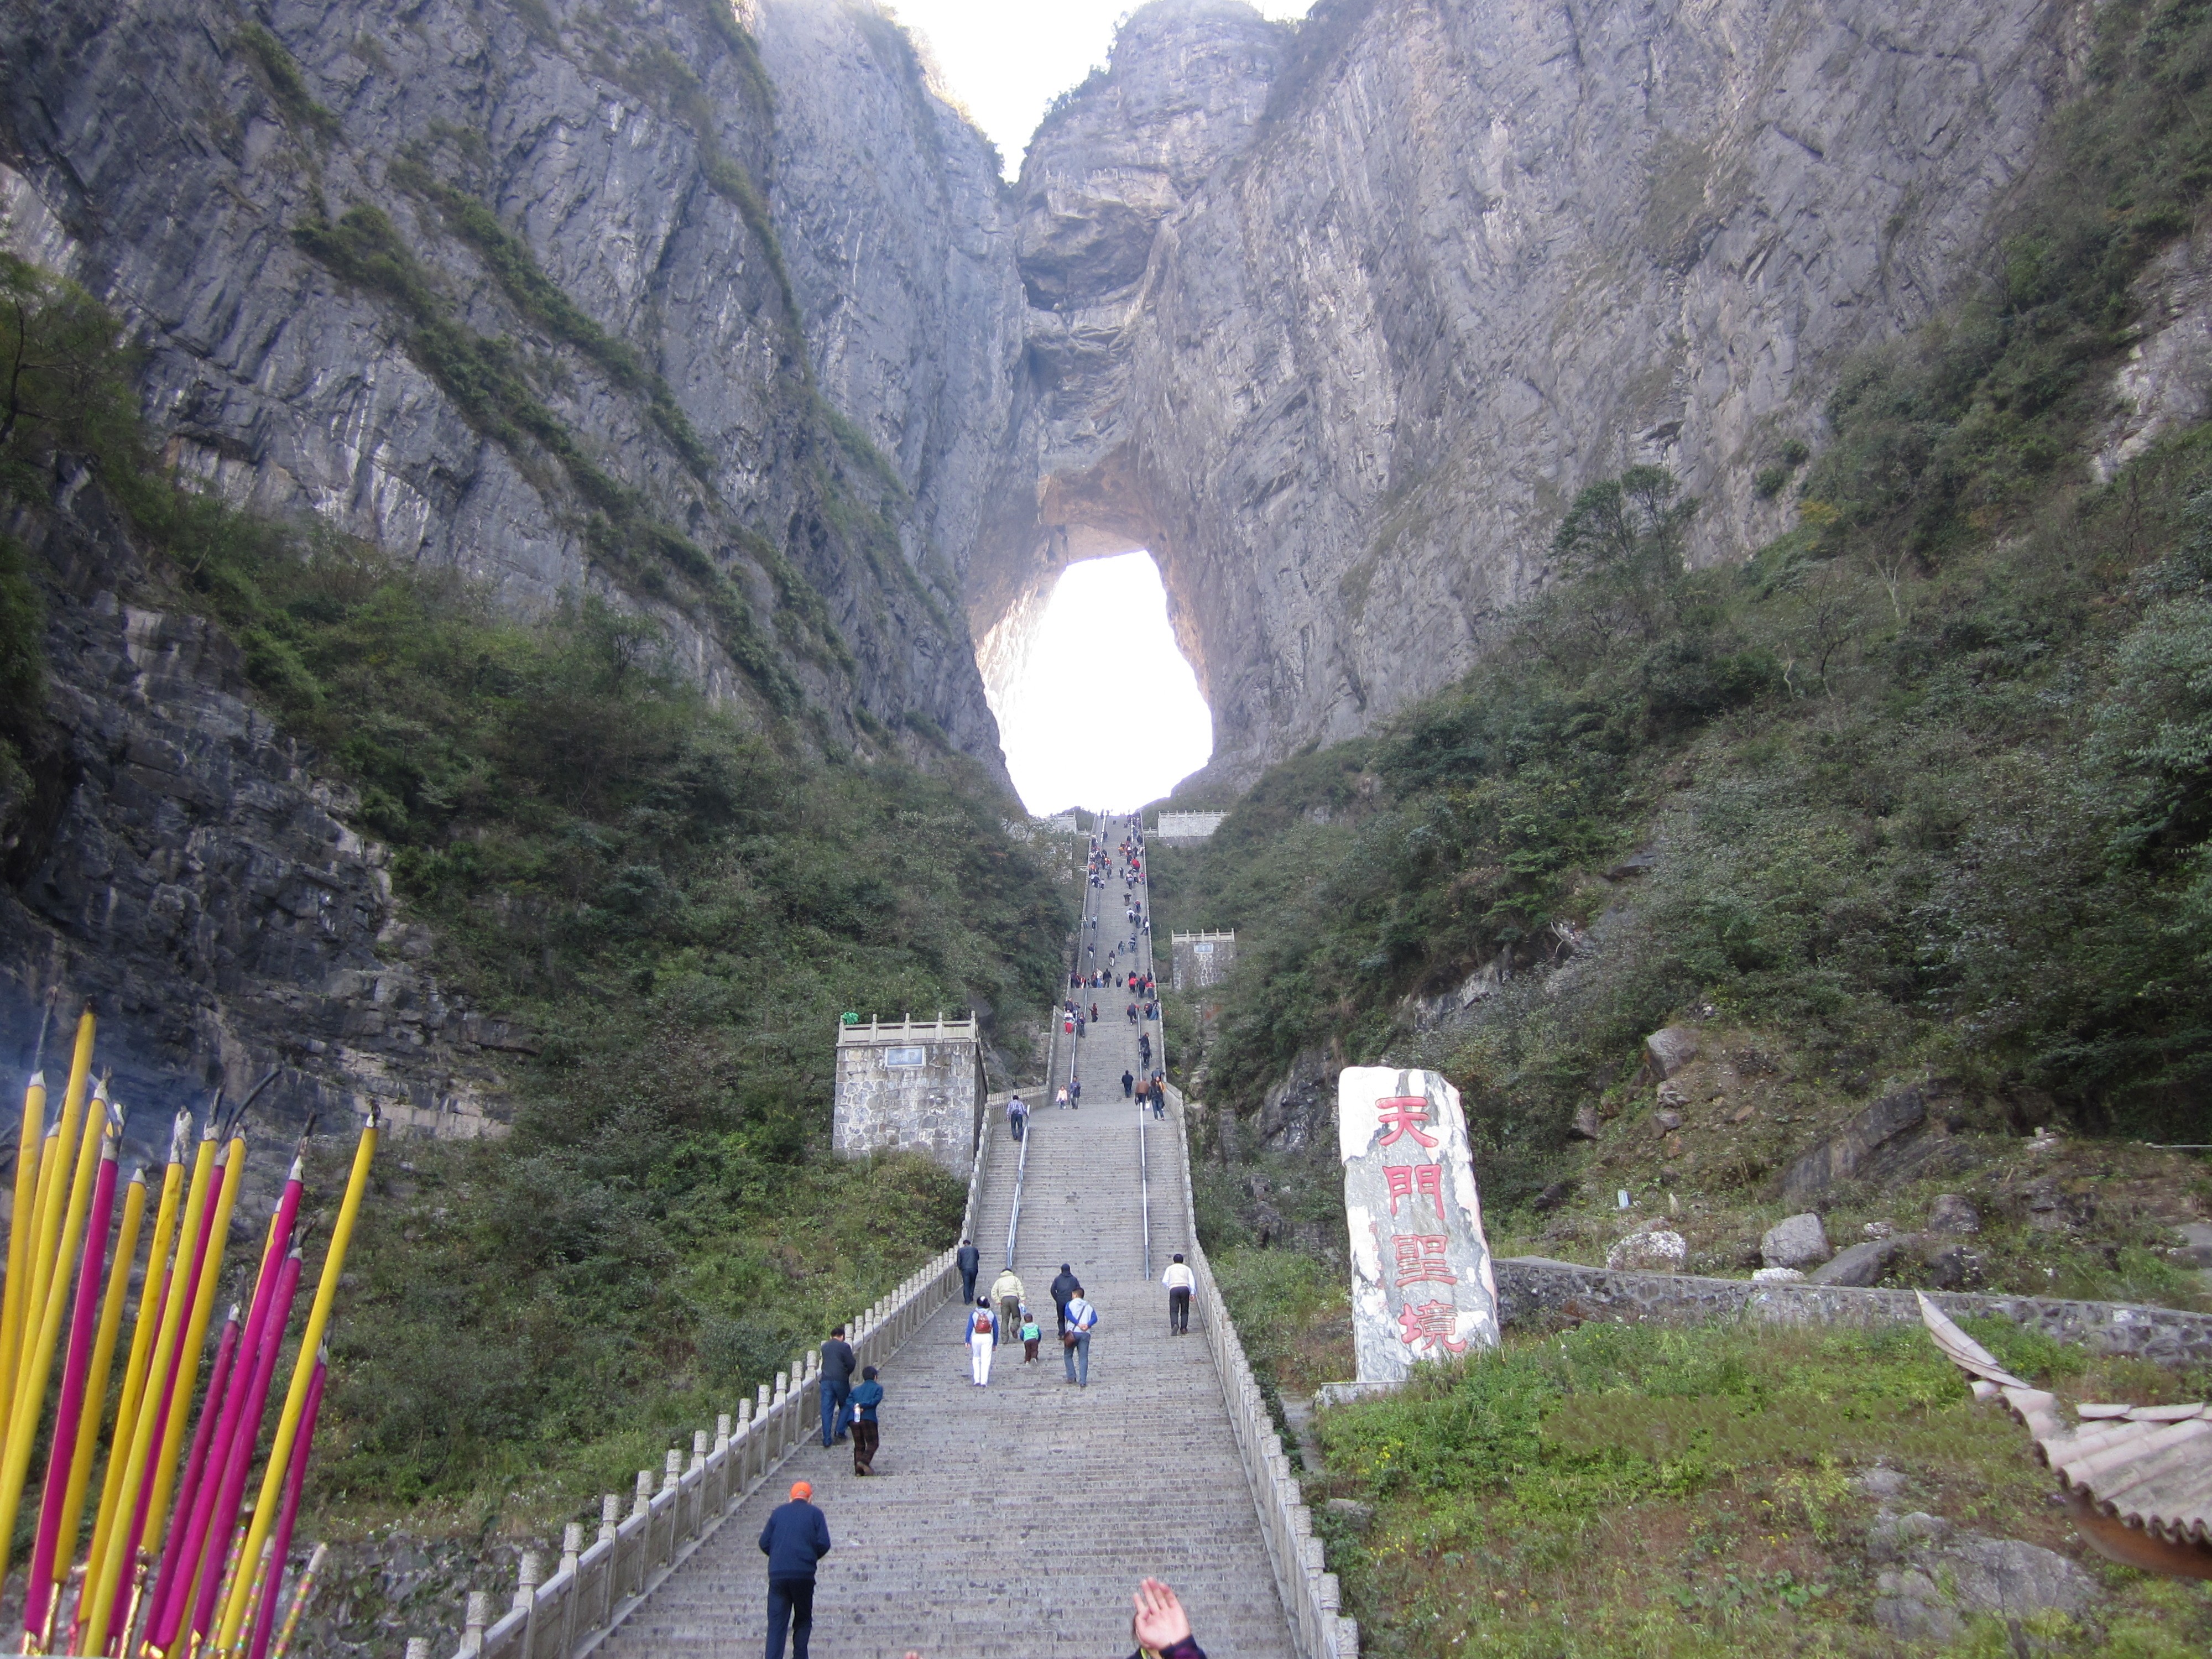 The final steps leading up to the Heaven's Gate